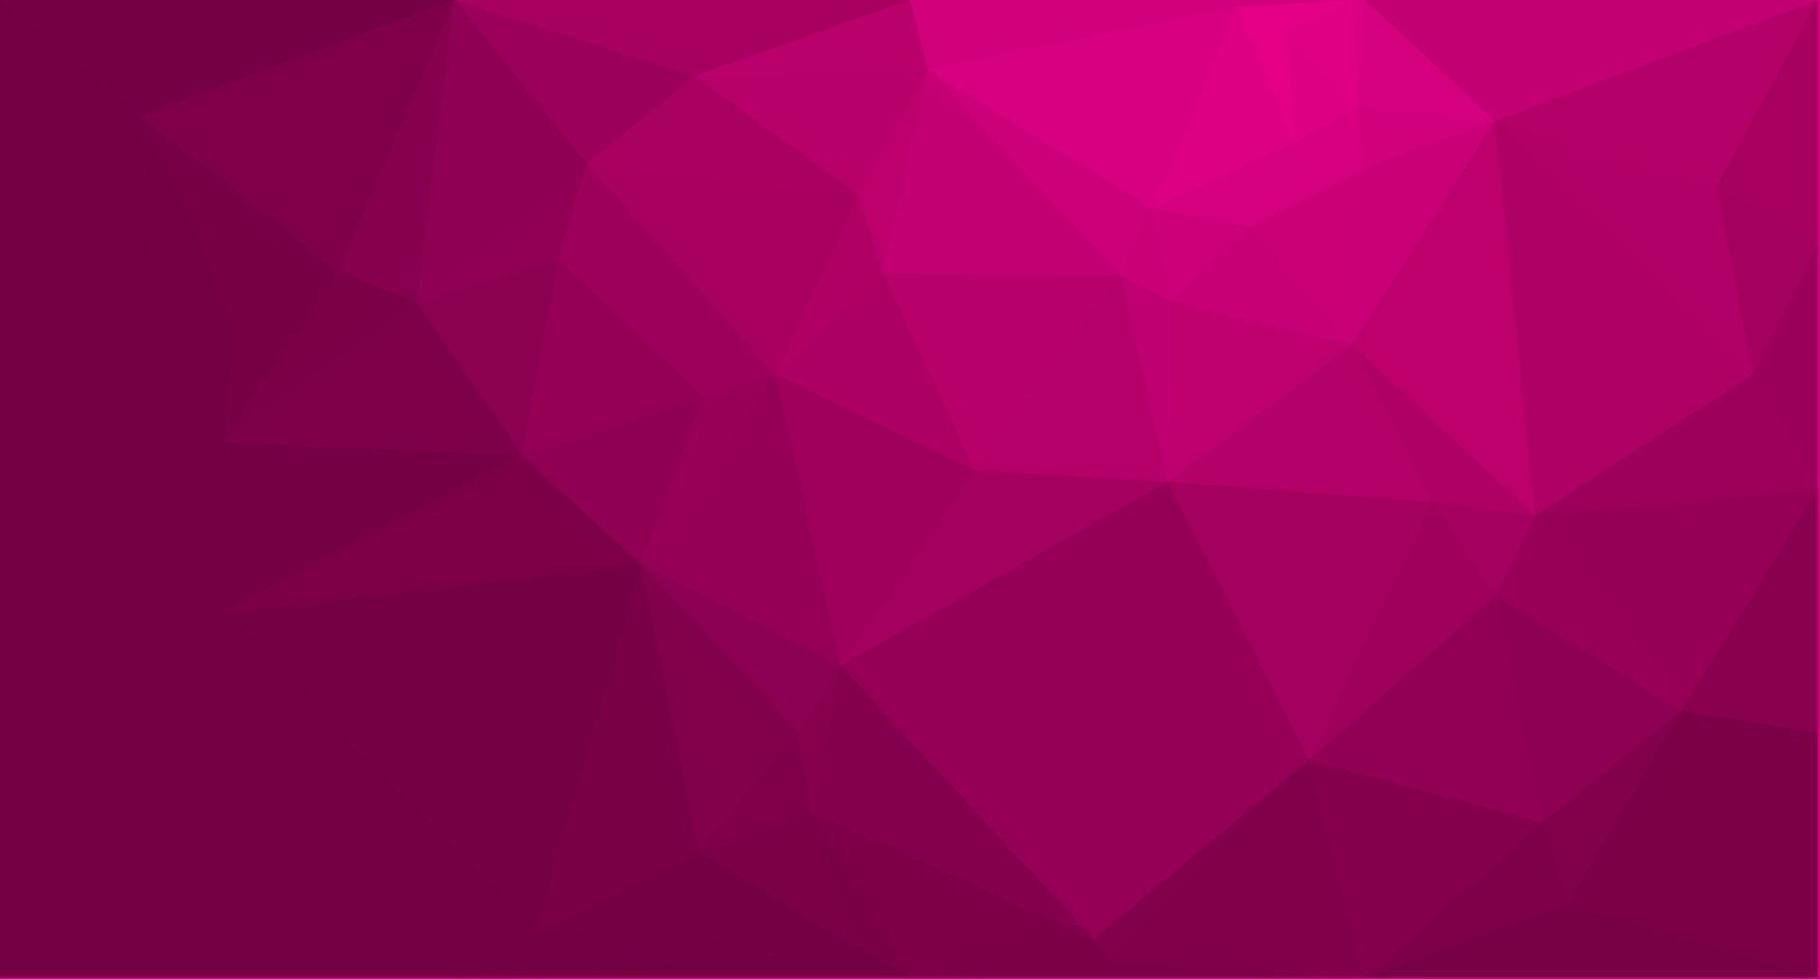 Abstract Low Polygon gradient background illustration. Low poly banner with triangle shapes vector